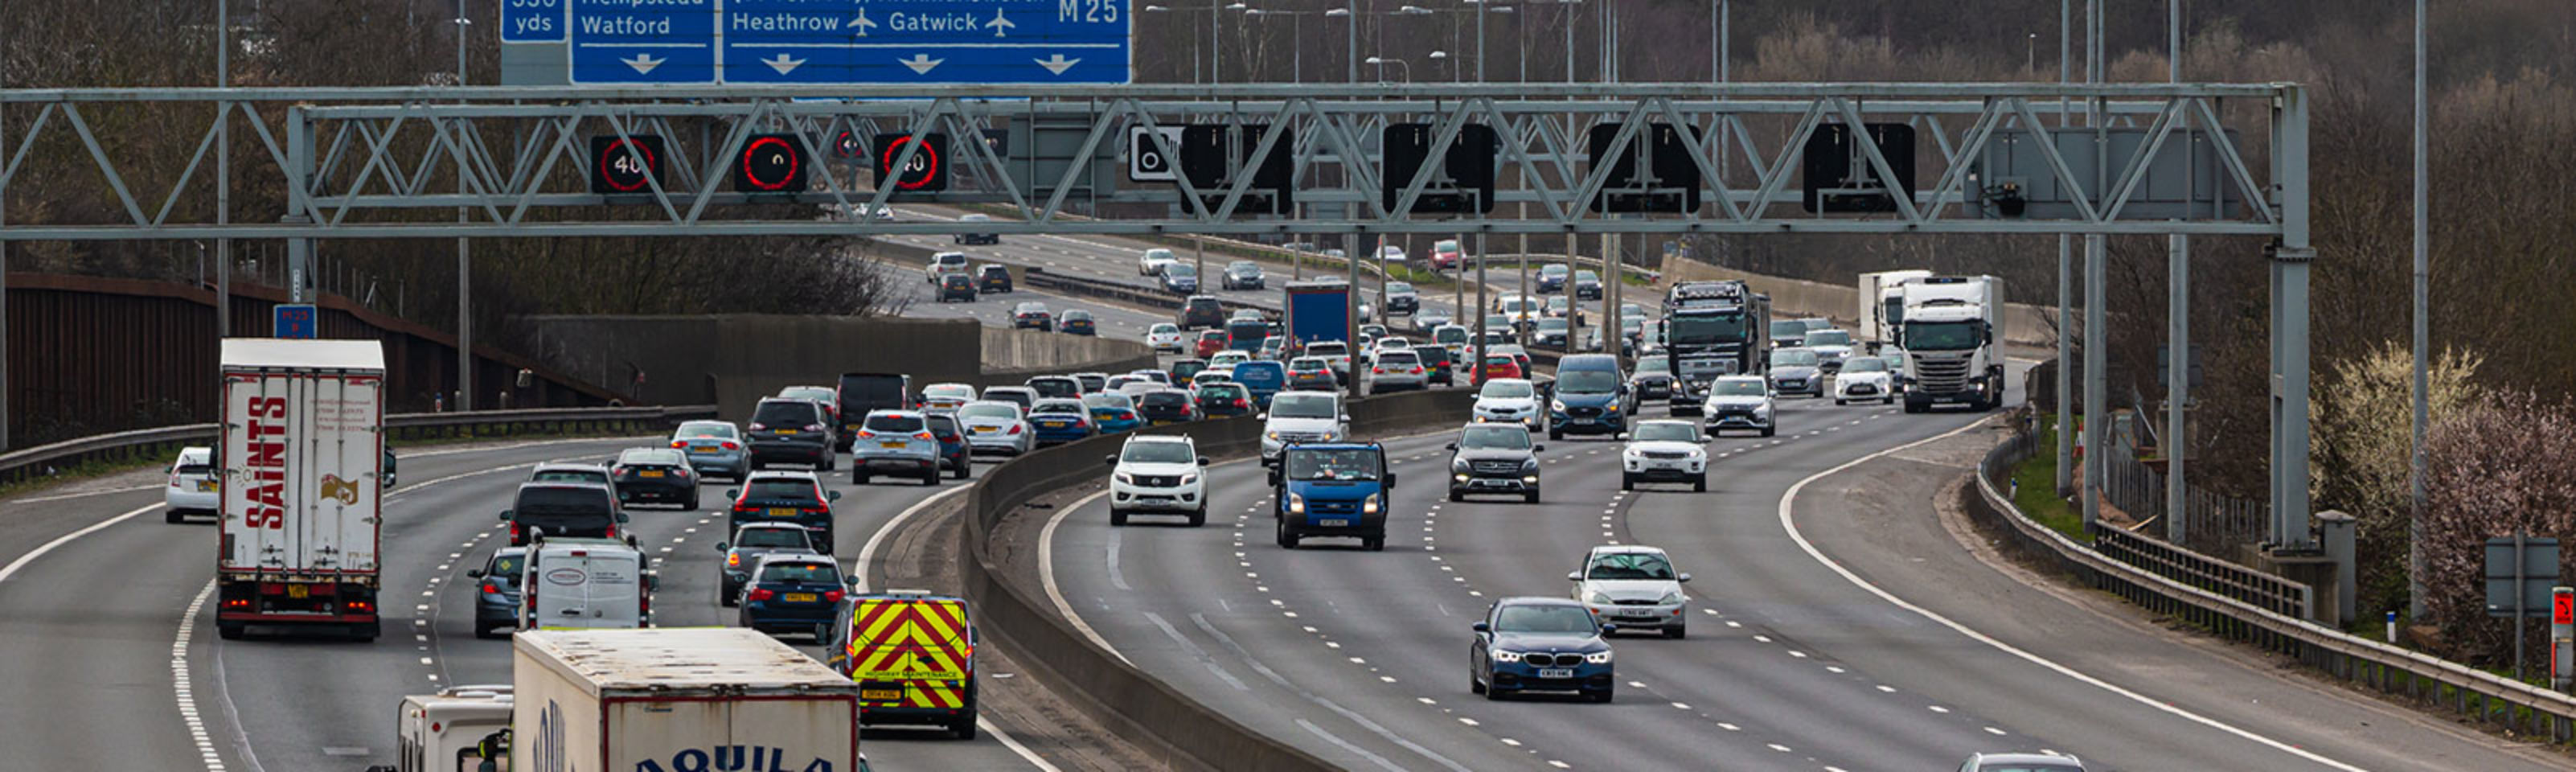 Smart motorways and hard shoulders causing headaches for drivers